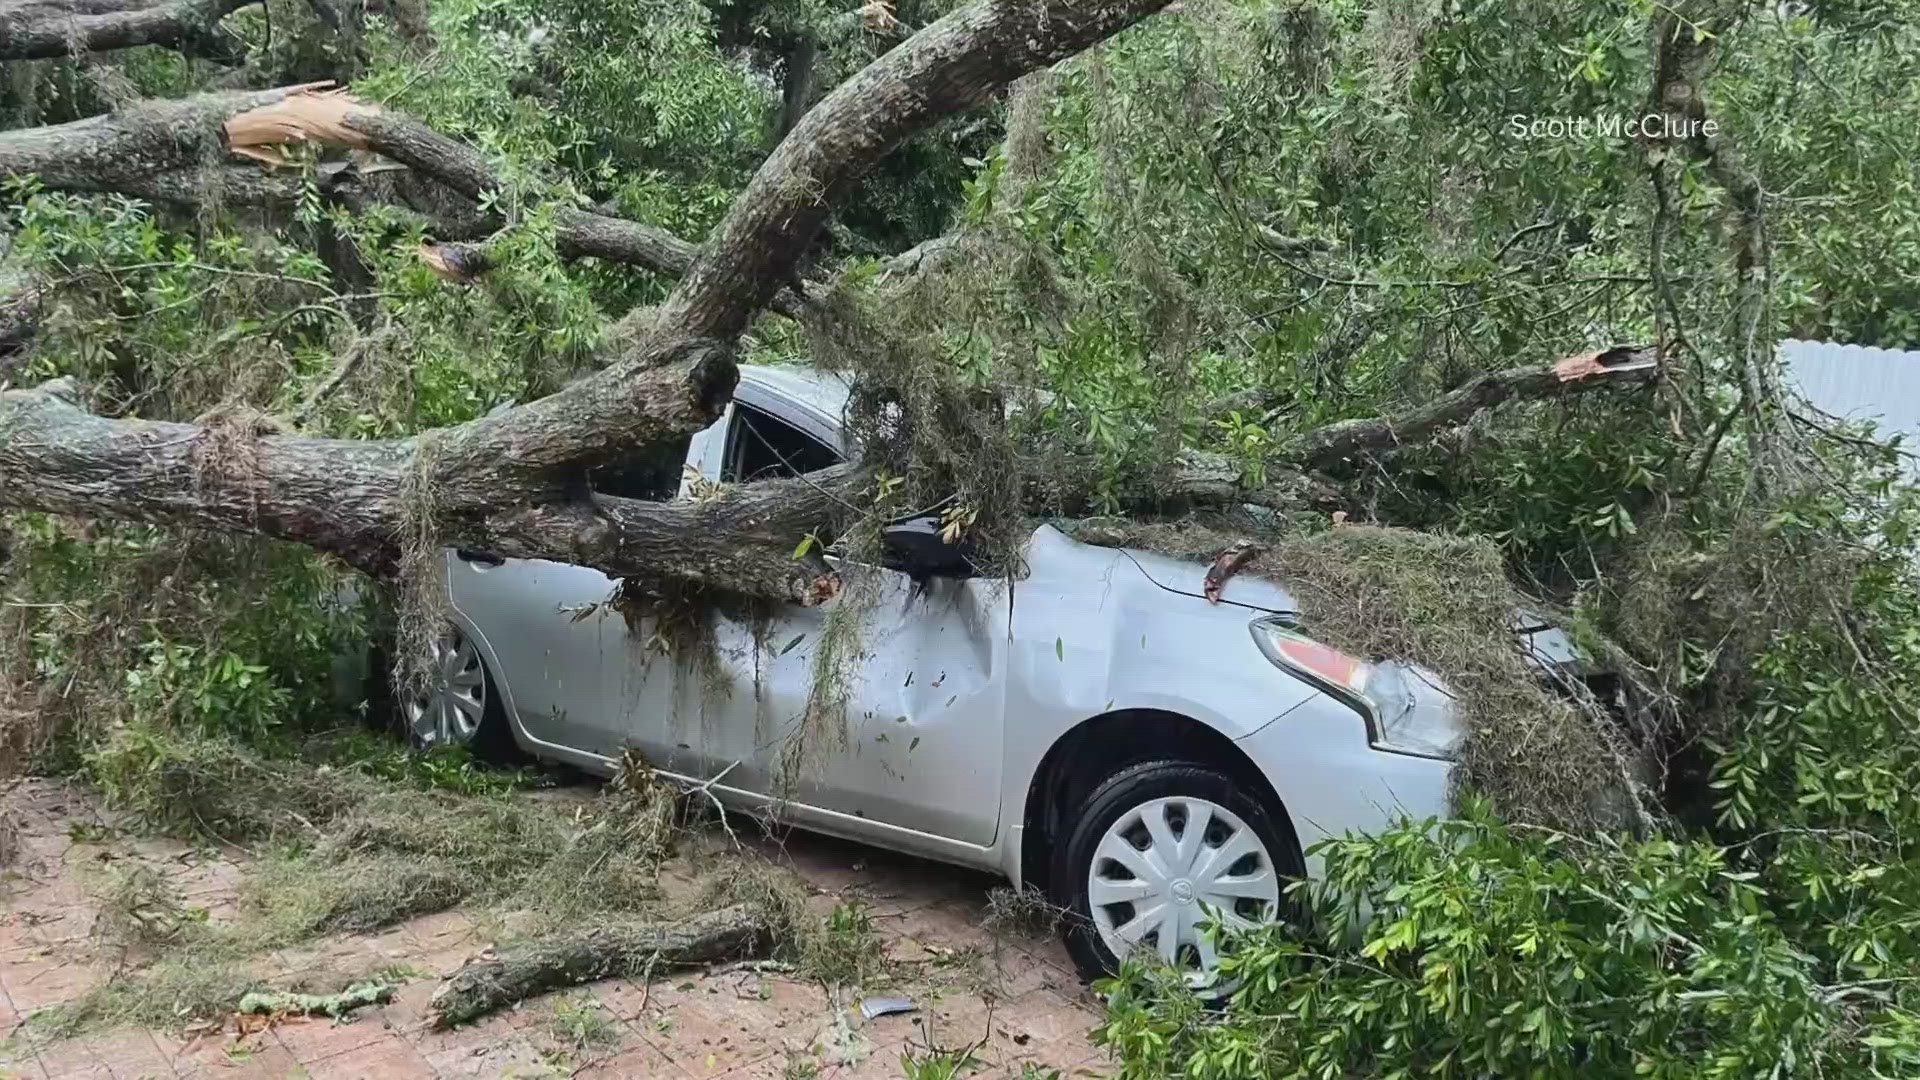 Cars, roads and property were strucfk by strong storms Friday morning.